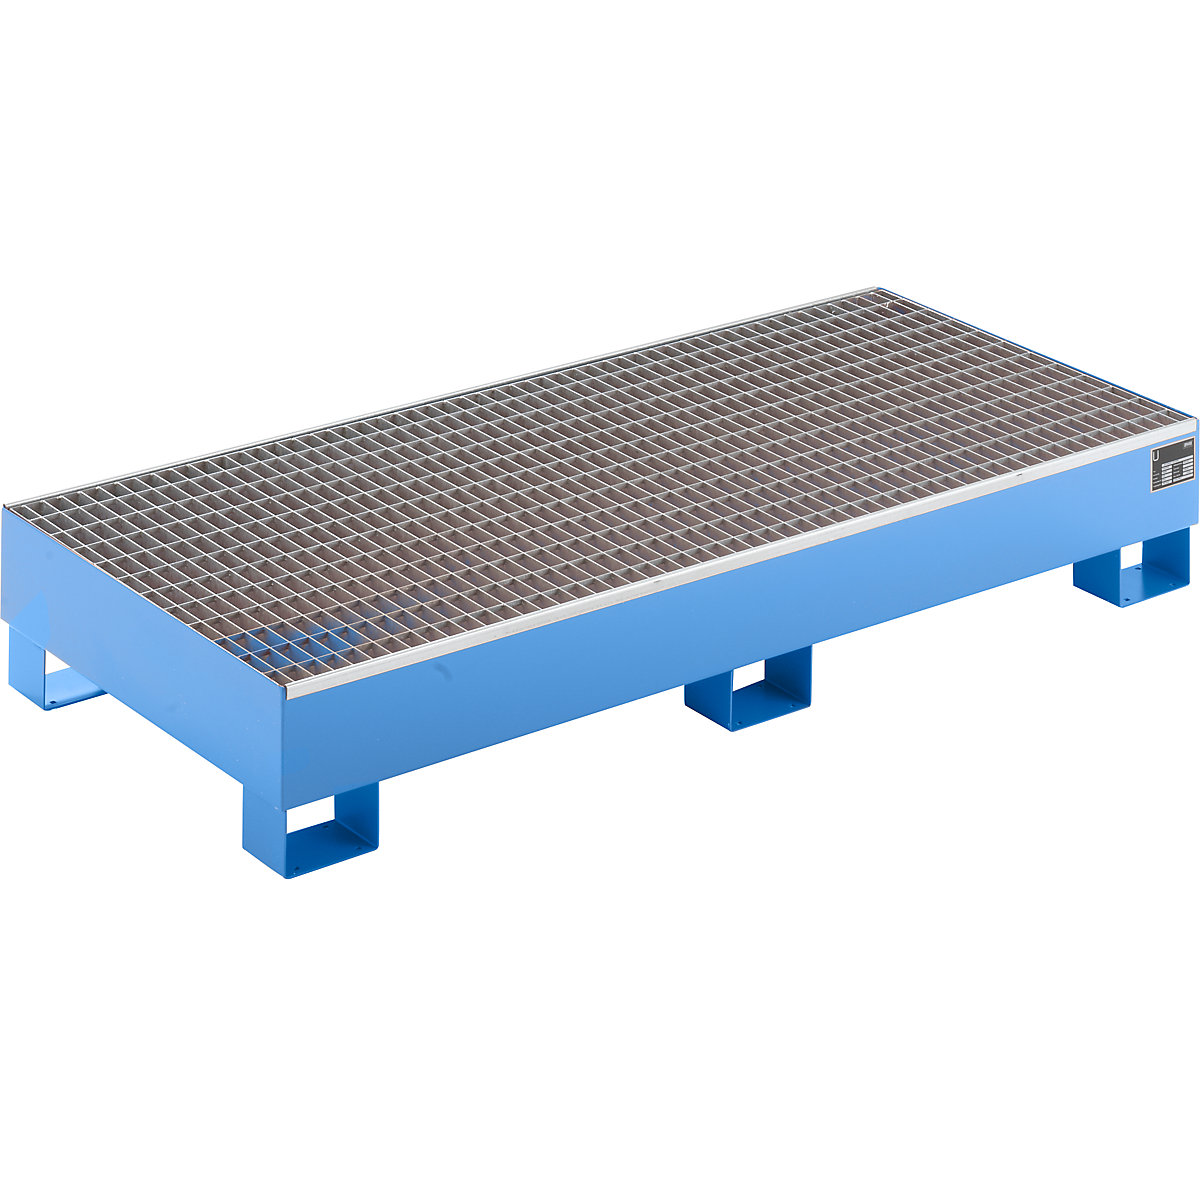 EUROKRAFTbasic – Sump tray made from sheet steel, LxWxH 1800 x 800 x 275 mm, blue RAL 5012, with grate